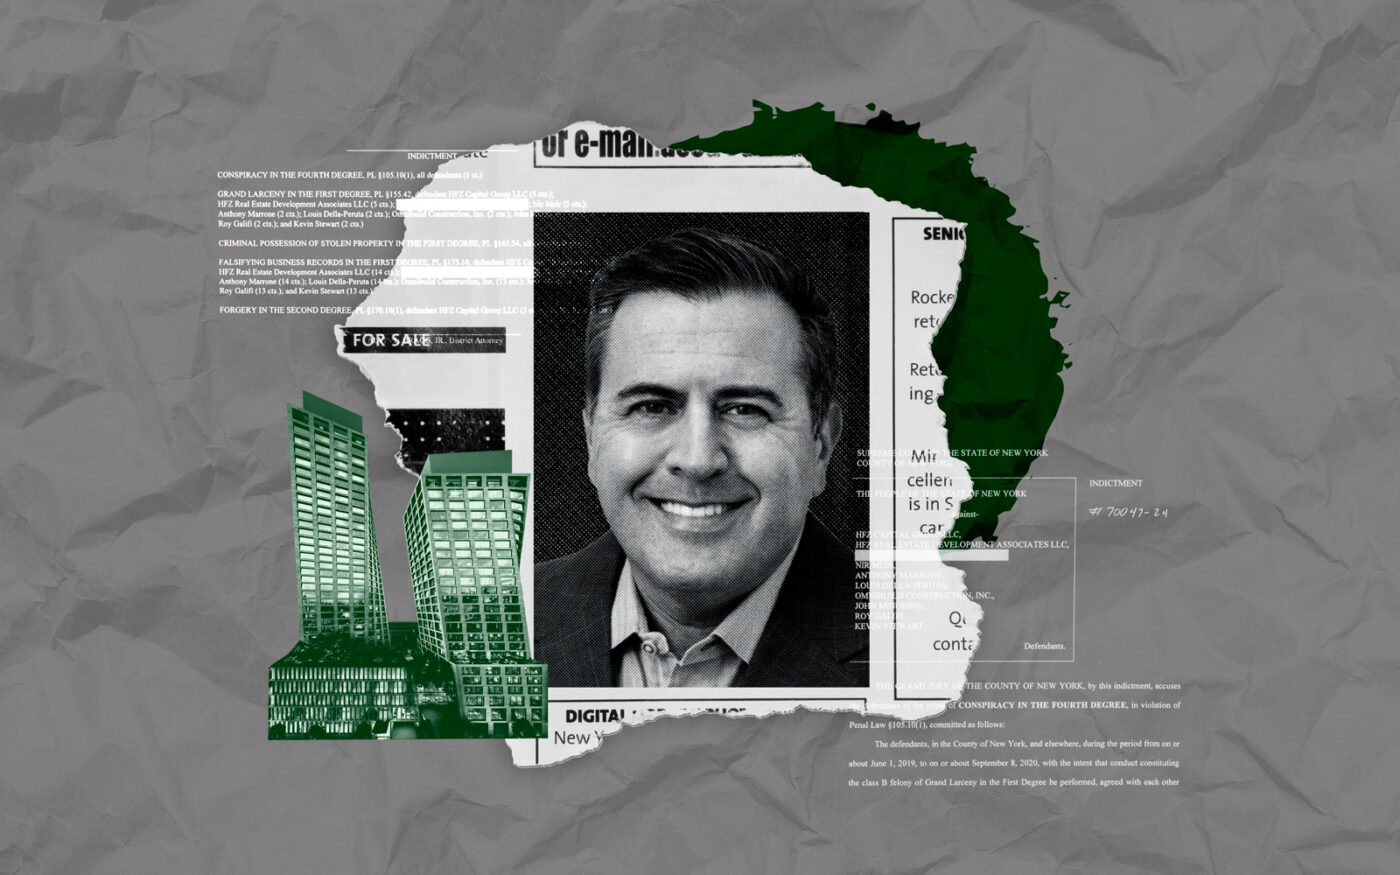 Who is John Mingione, Omnibuild CEO and indicted co-conspirator